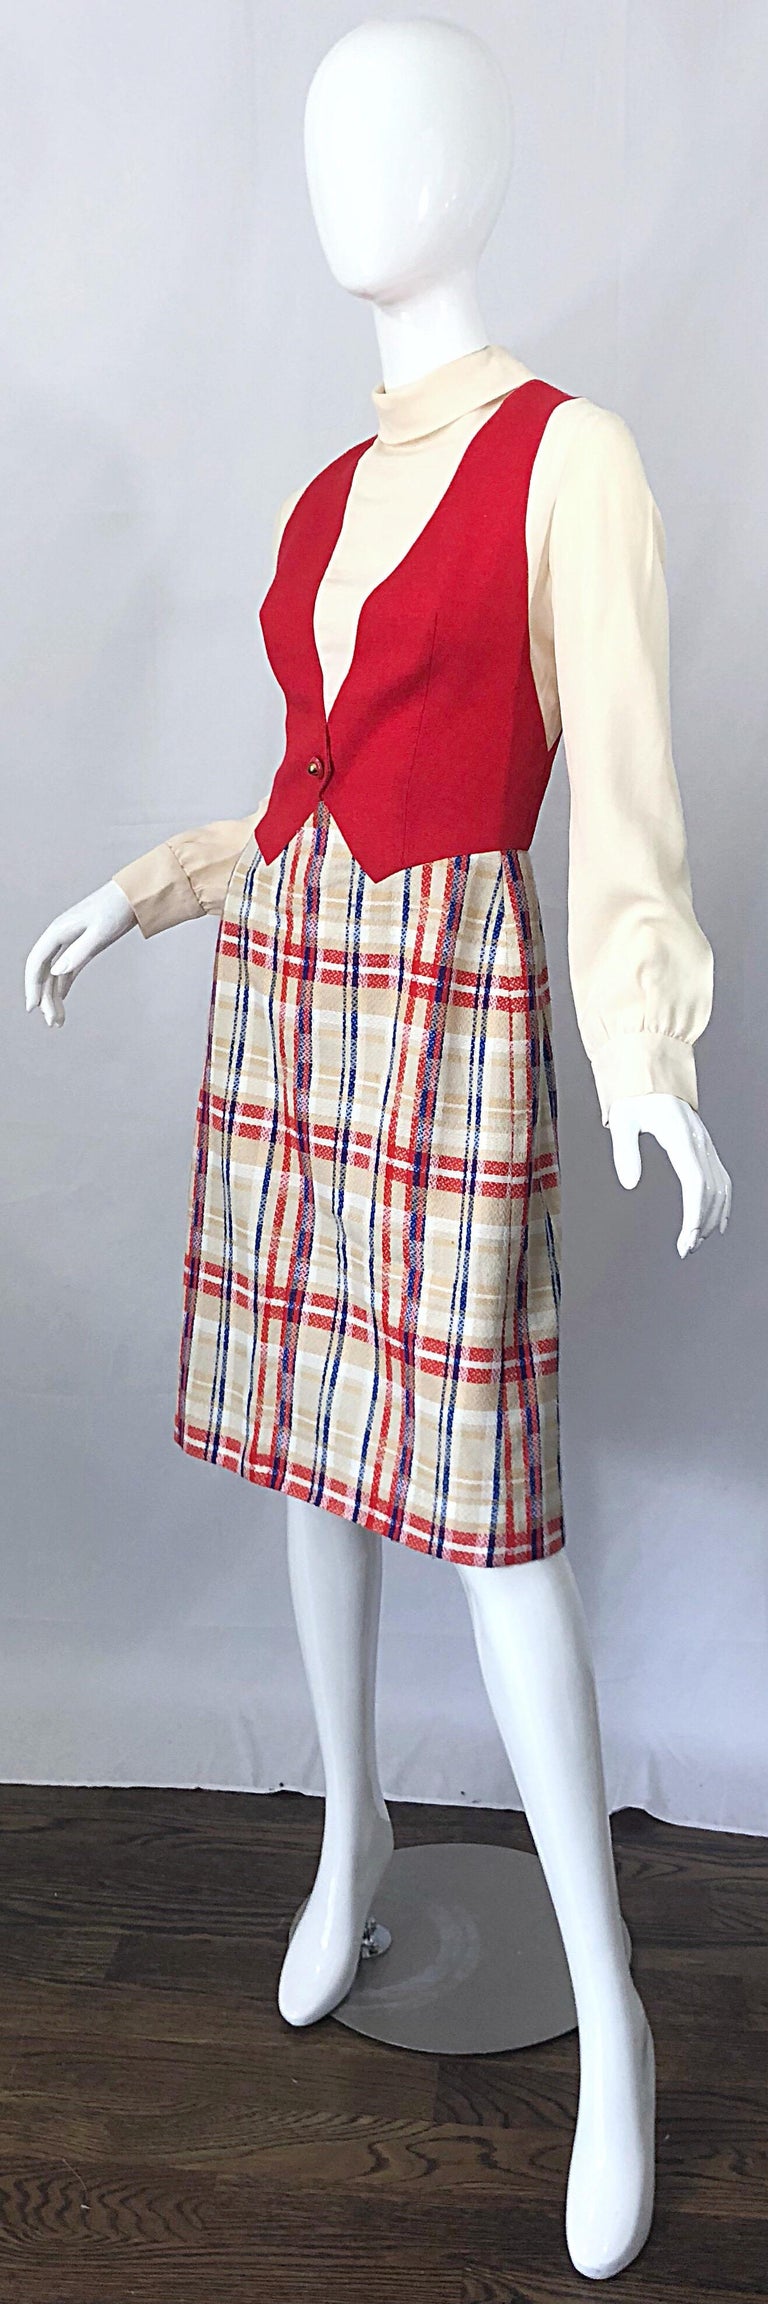 Chic 1960s Pat Sandler Trompe l'Oeil Red White and Blue Vintage 60s A Line Dress In Excellent Condition For Sale In San Diego, CA